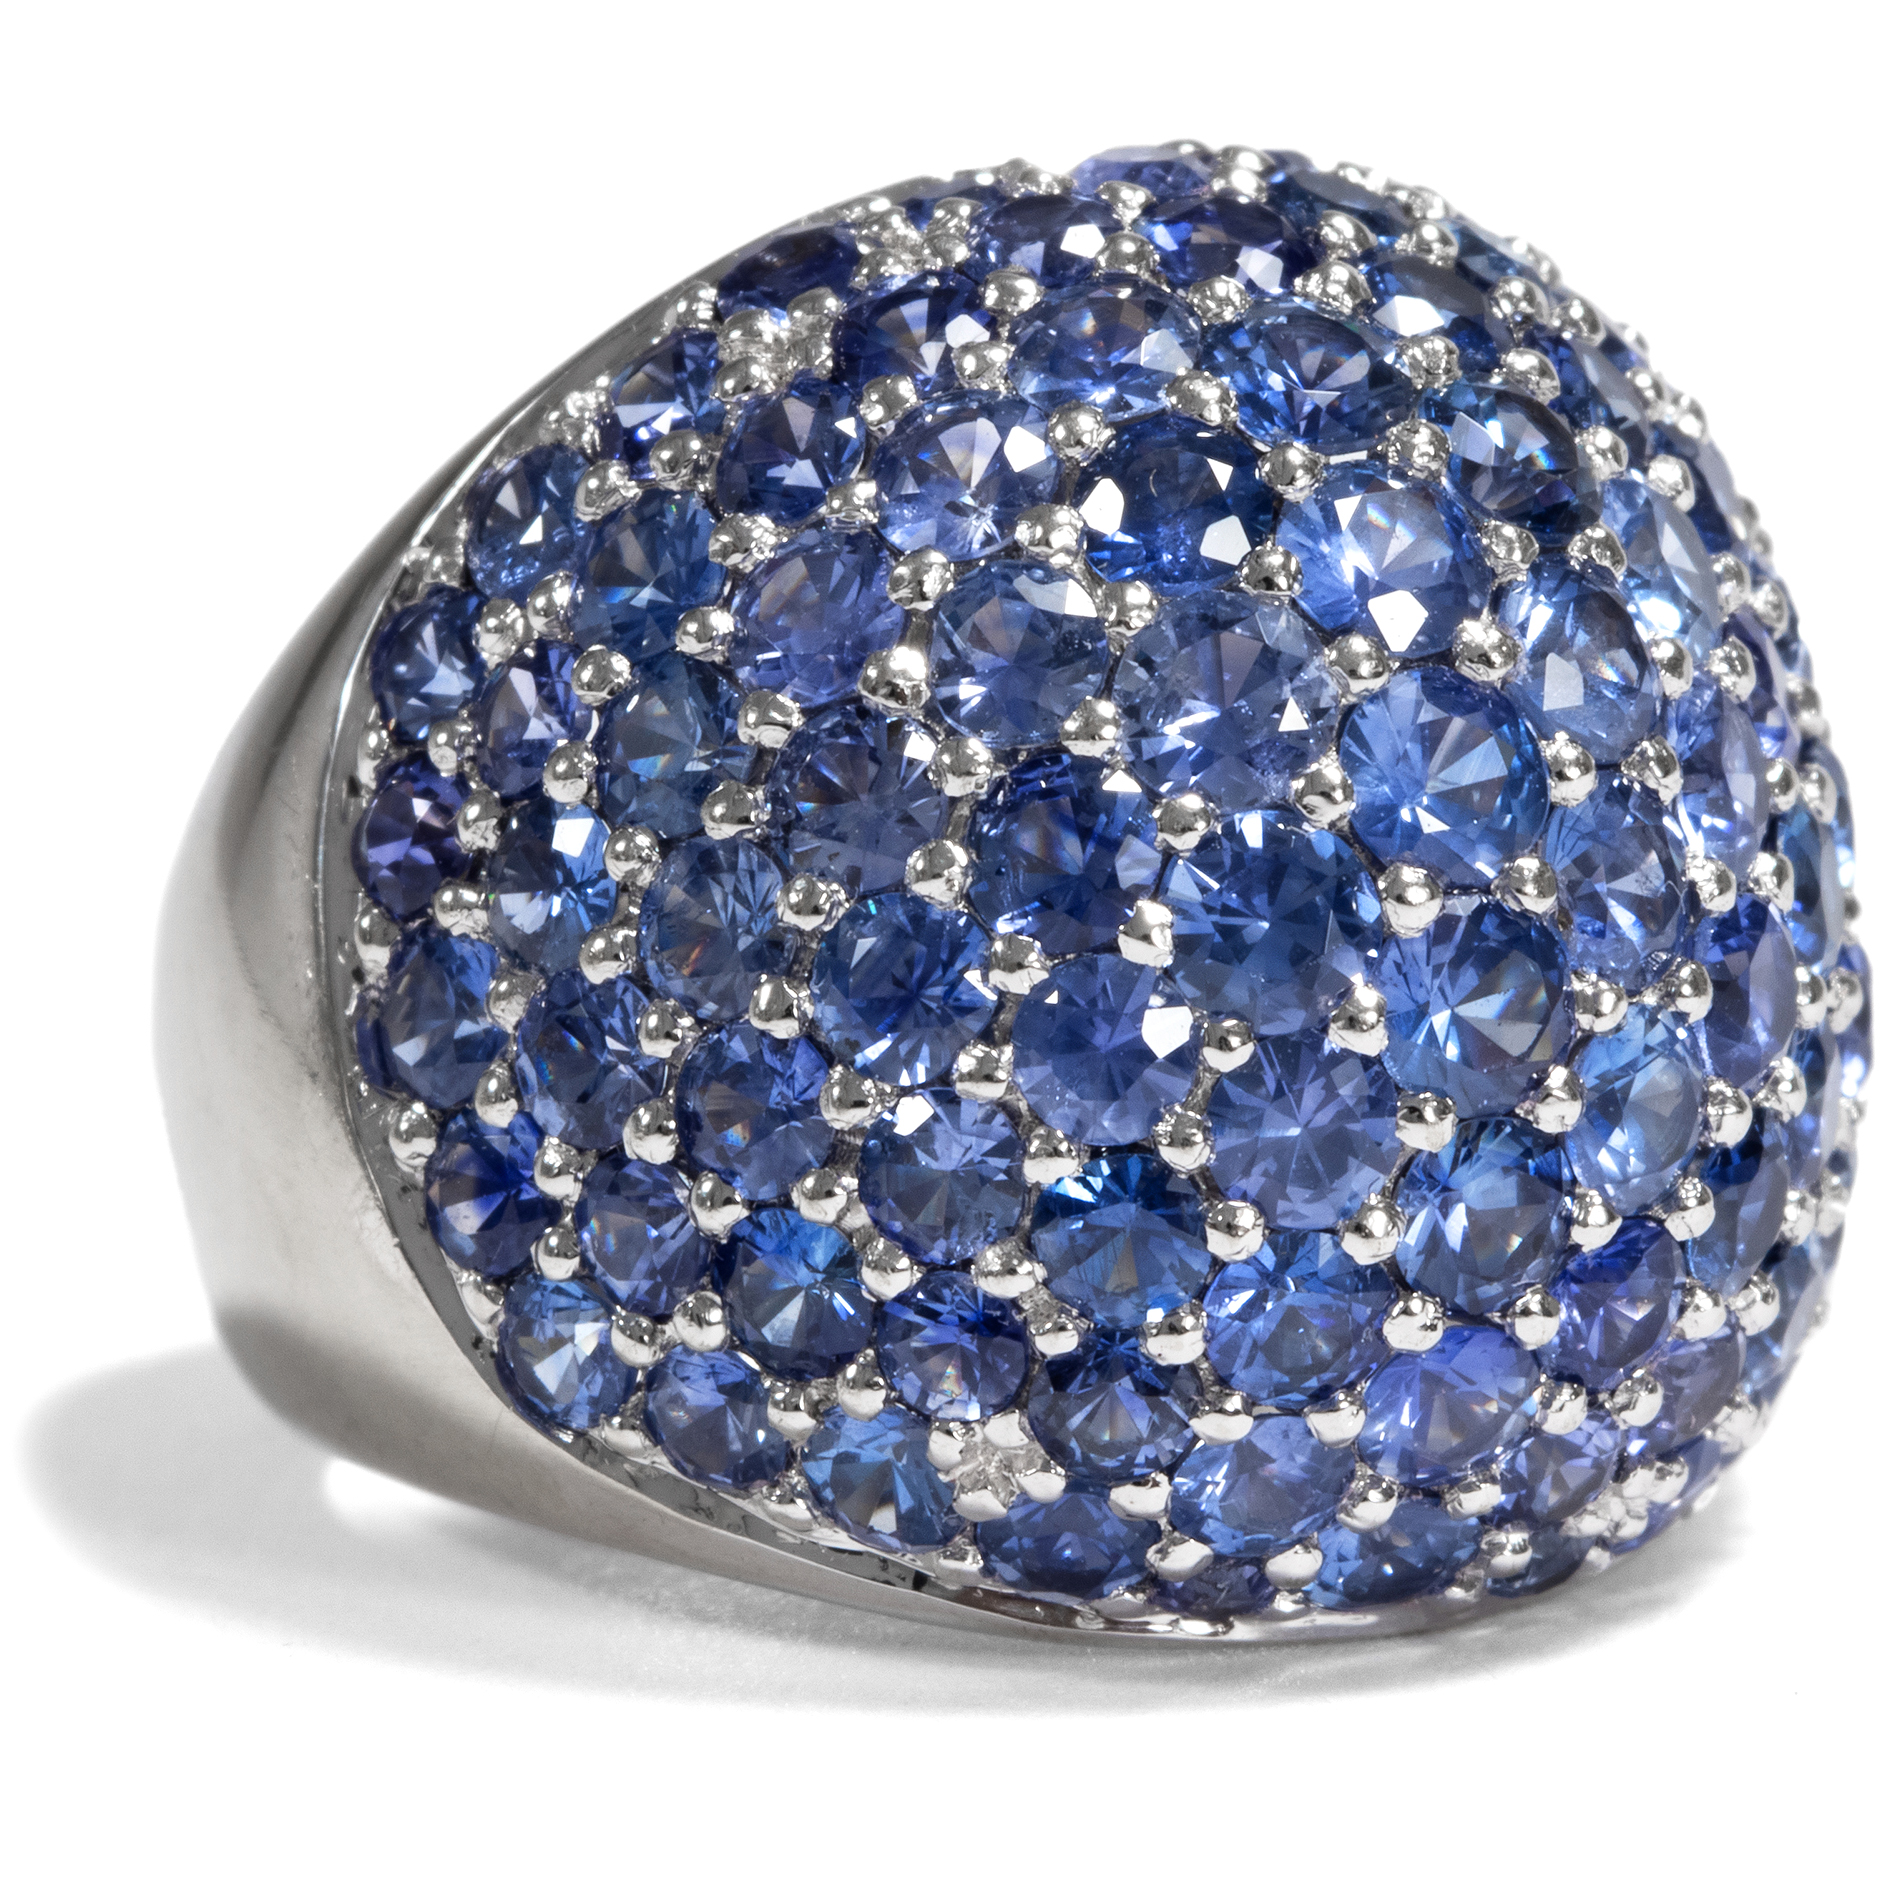 Vintage Ring With 10 Carat Blue Sapphires in White Gold, ca. 2000